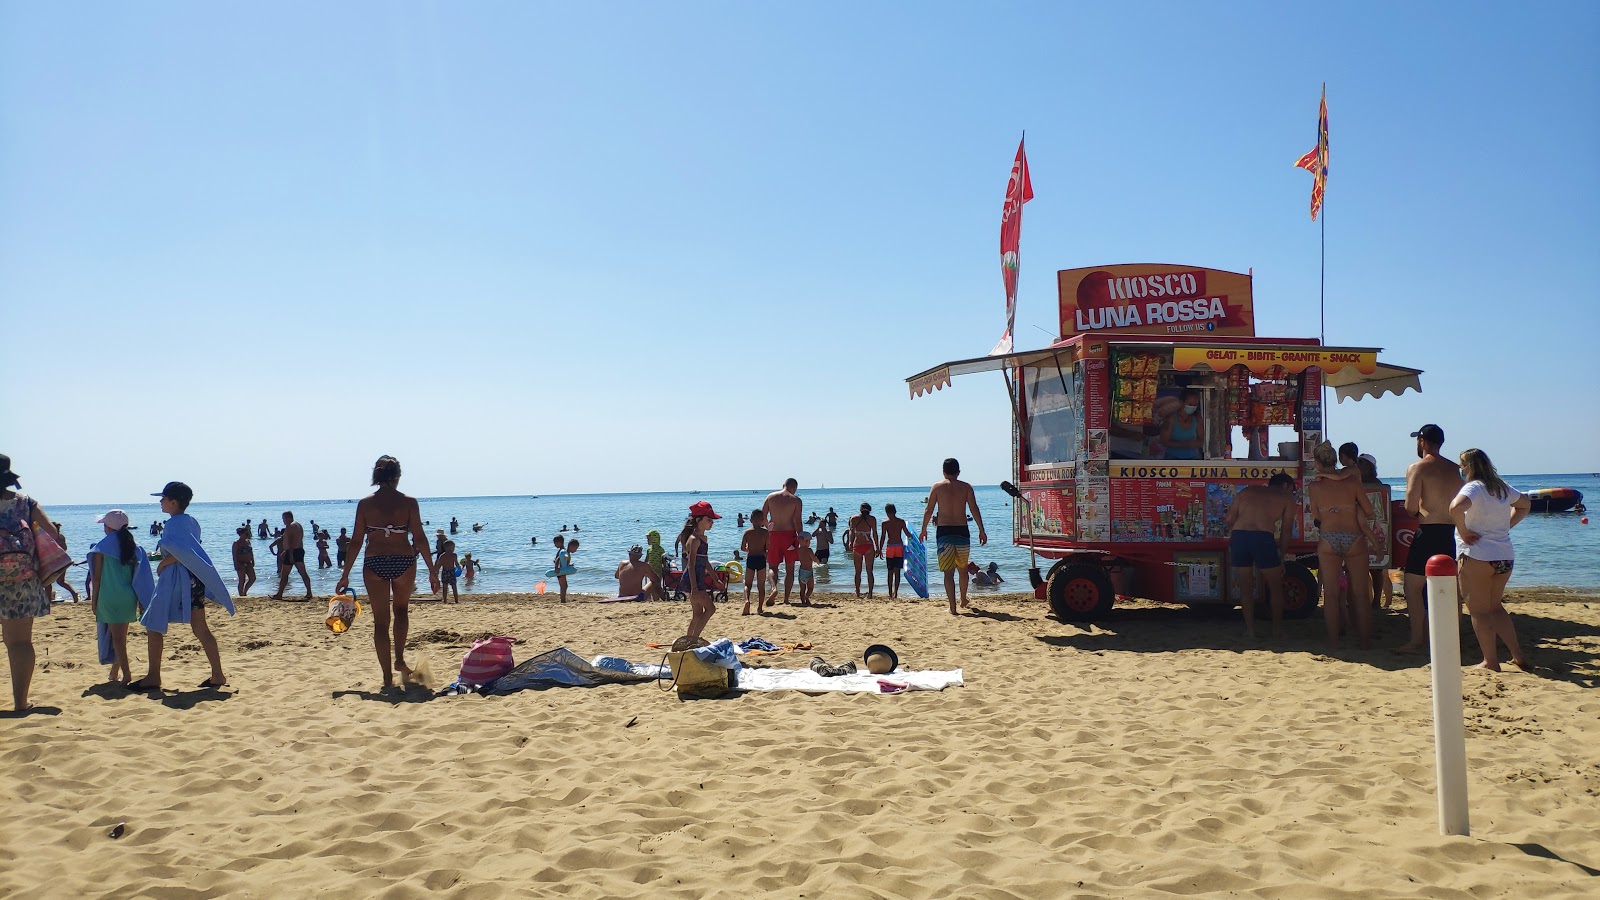 Photo of Bibione Beach - popular place among relax connoisseurs